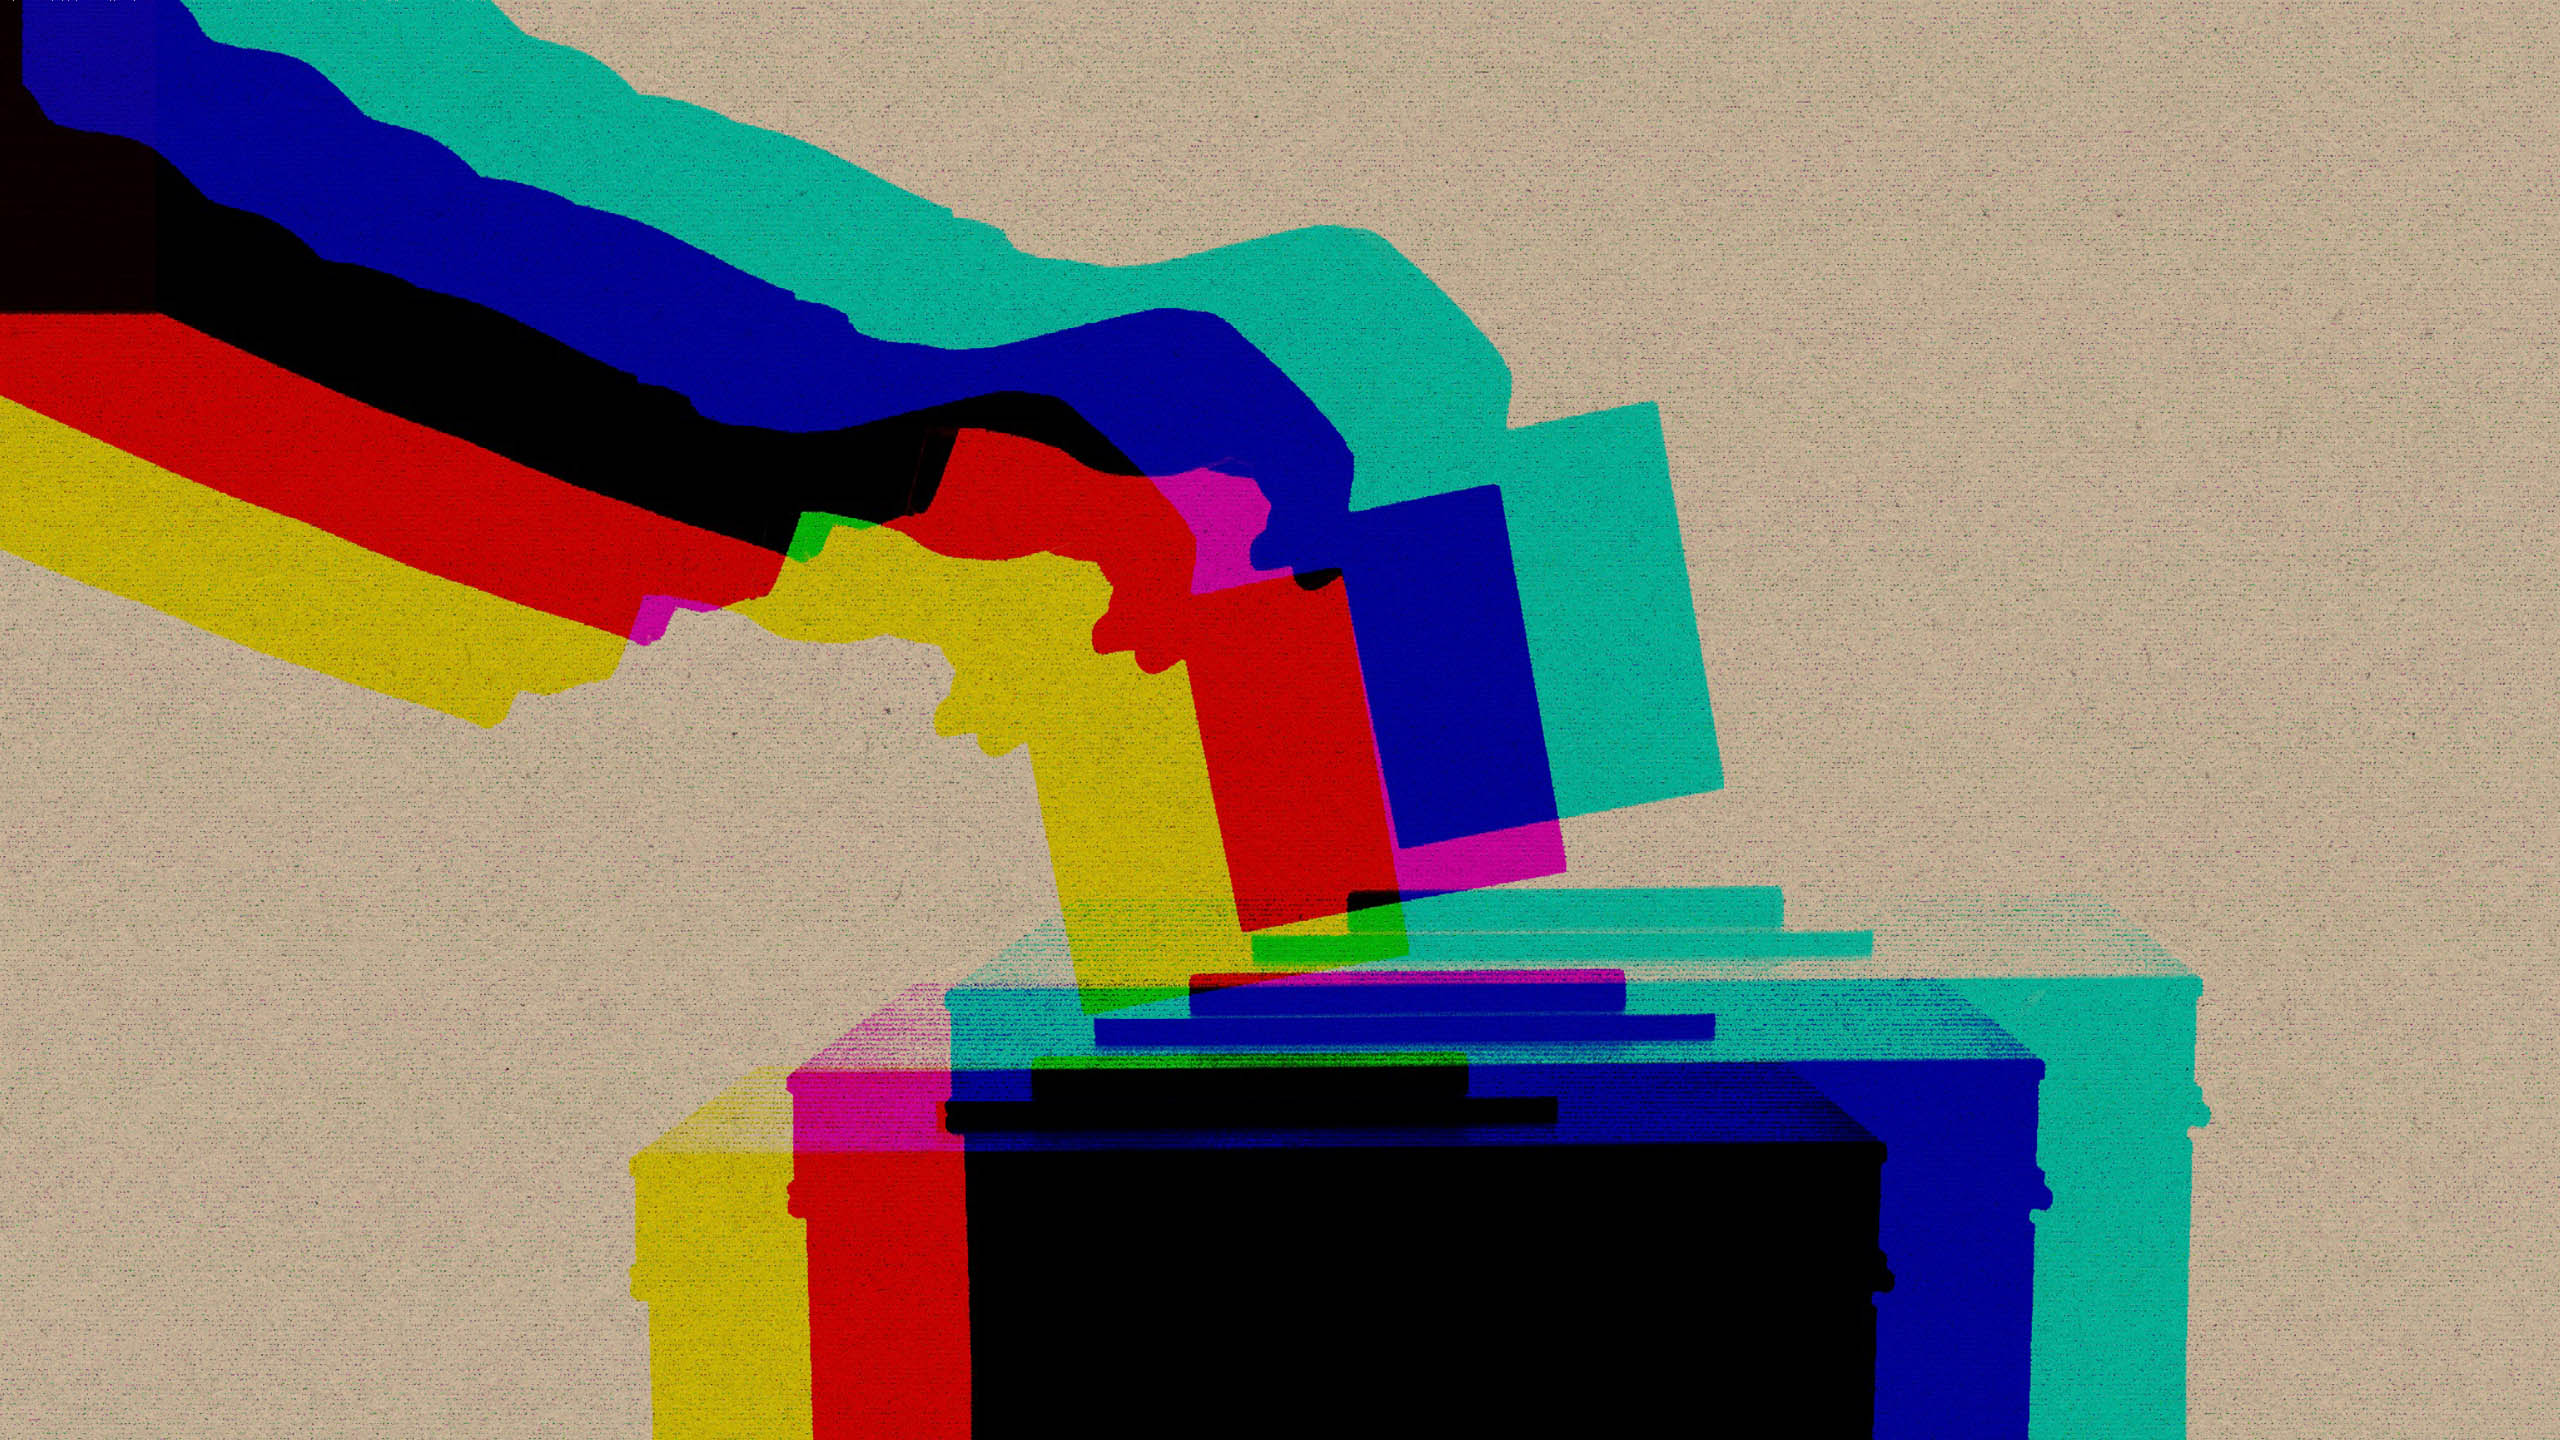 A digitially-glitched silhouette of a hand casting a vote in a ballot box.